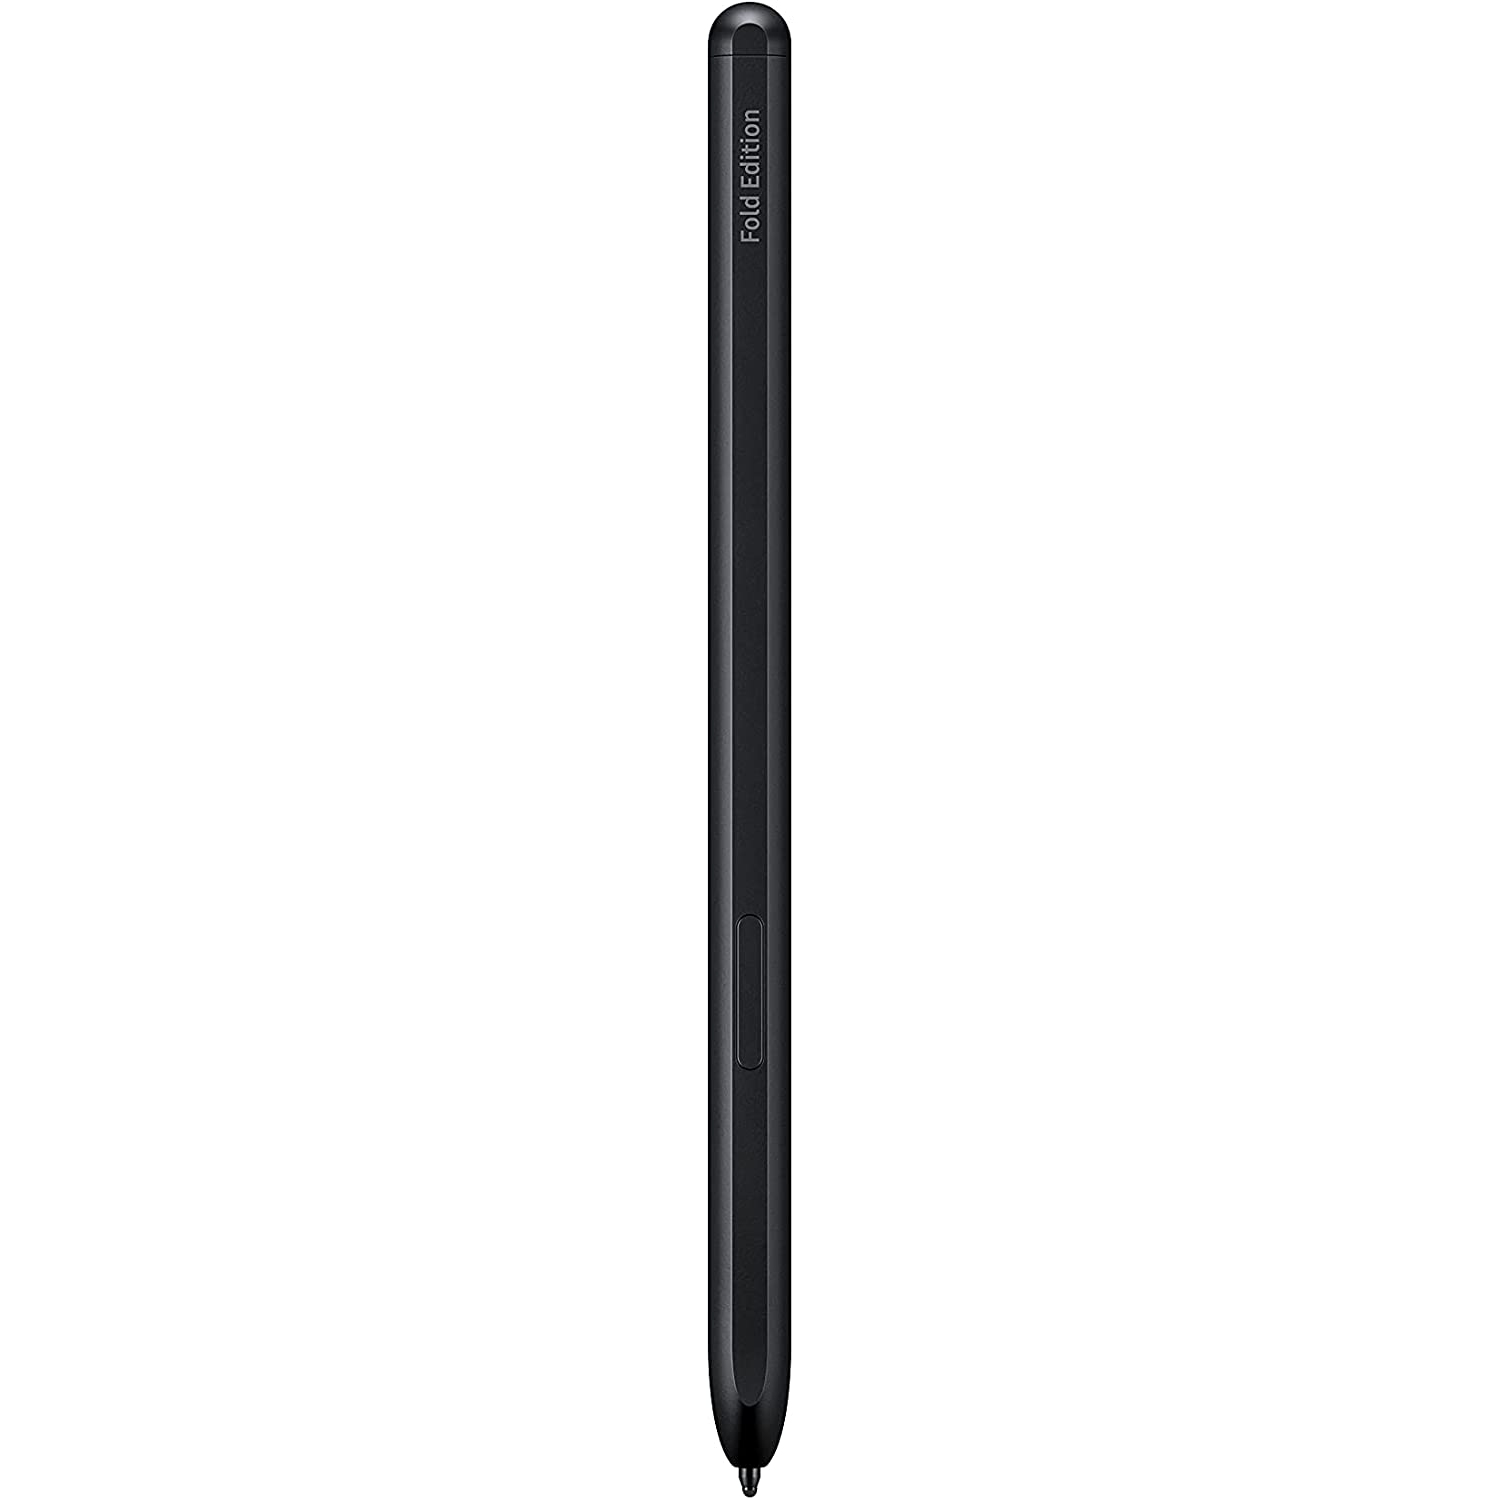 SAMSUNG Galaxy S Pen Fold Edition, Slim 1.5mm Pen Tip, 4,096 Pressure Levels, Included Carry Storage Pouch, Compatible Galaxy Z Fold 3 Phone Only, Black Open Box (10/10 Condition)